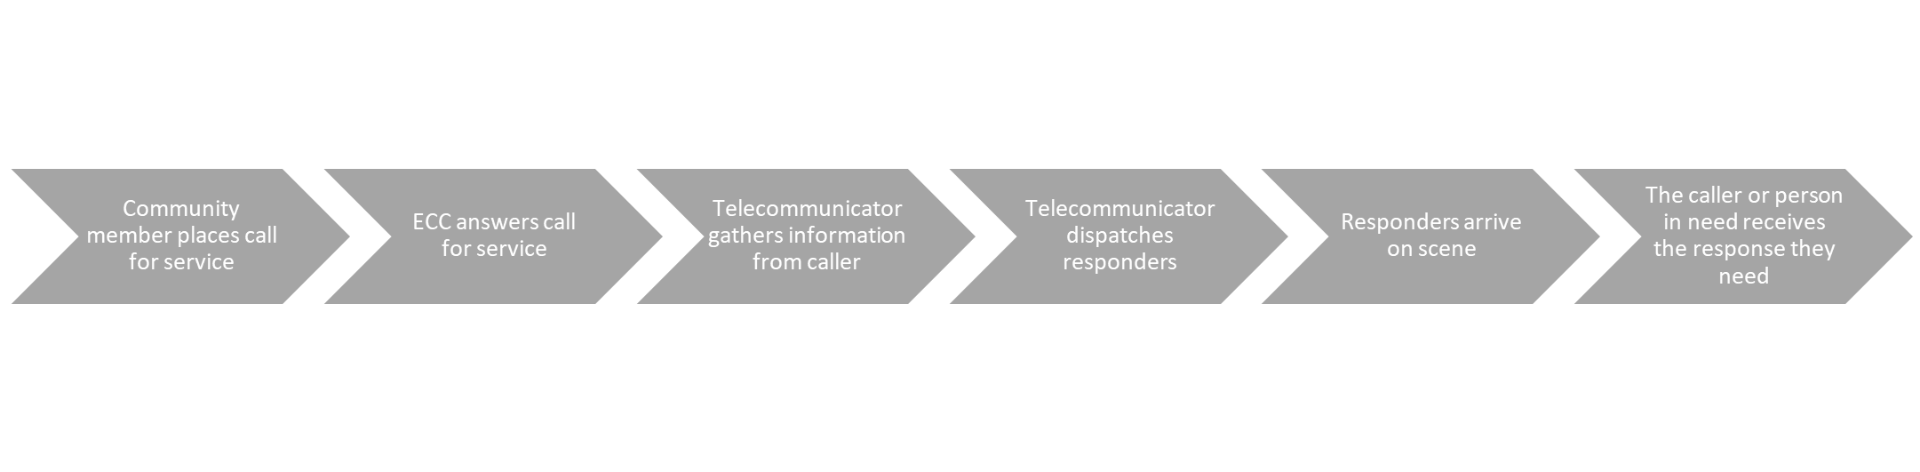 Process diagram reads: Community member places call for service ECC answers call for service, Telecommunicator gathers information from caller,  Telecommunicator dispatches responders, Responders arrive on scene, The caller or person in need receives the response they need